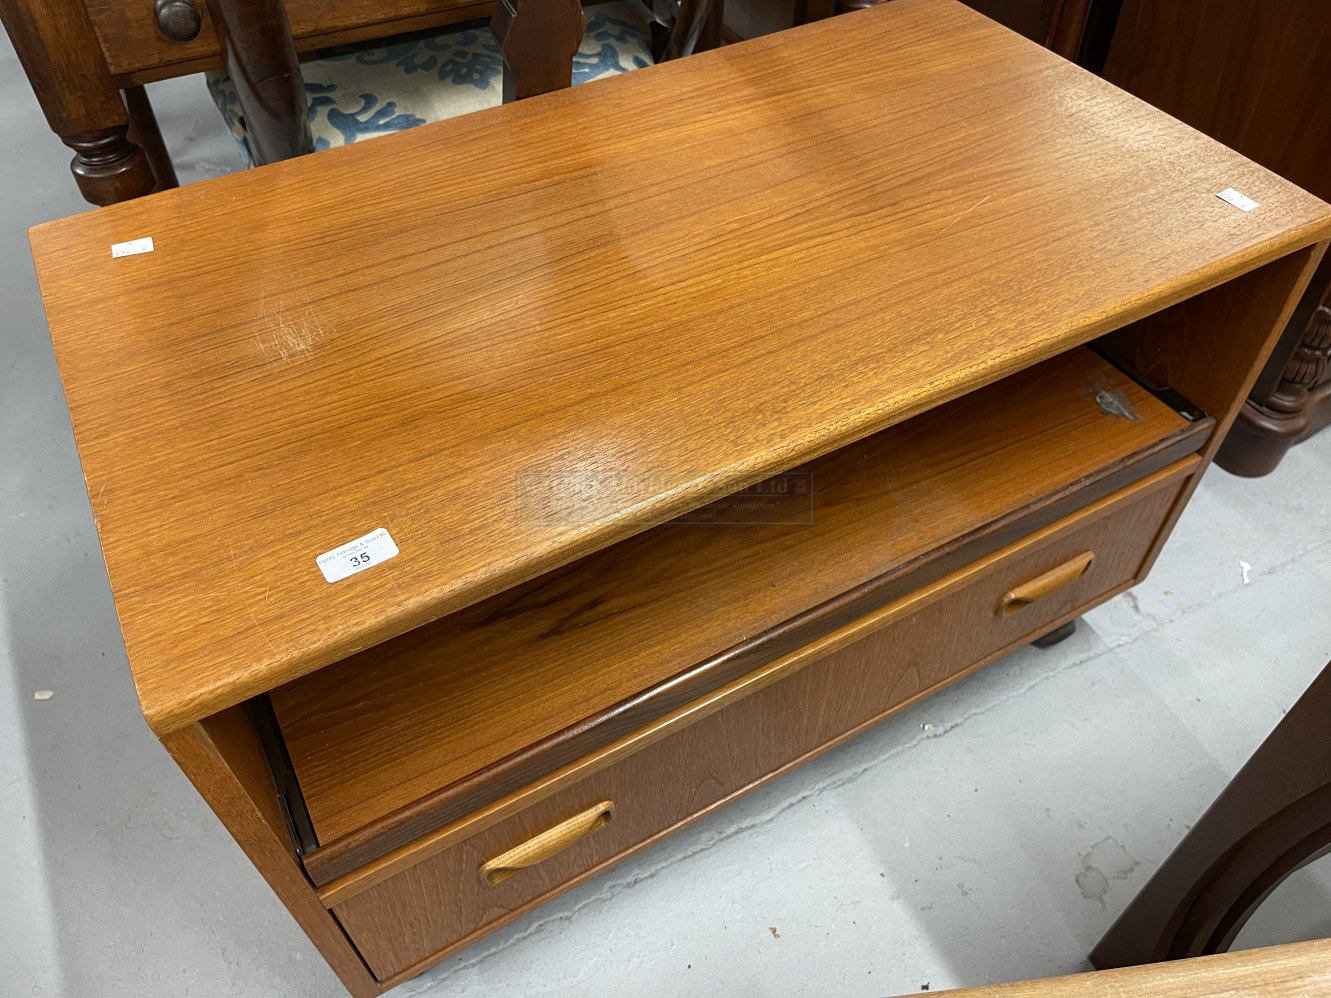 20th cent. 1970s G plan style teak furniture, television and video (satellite box) cabinet with - Image 2 of 2